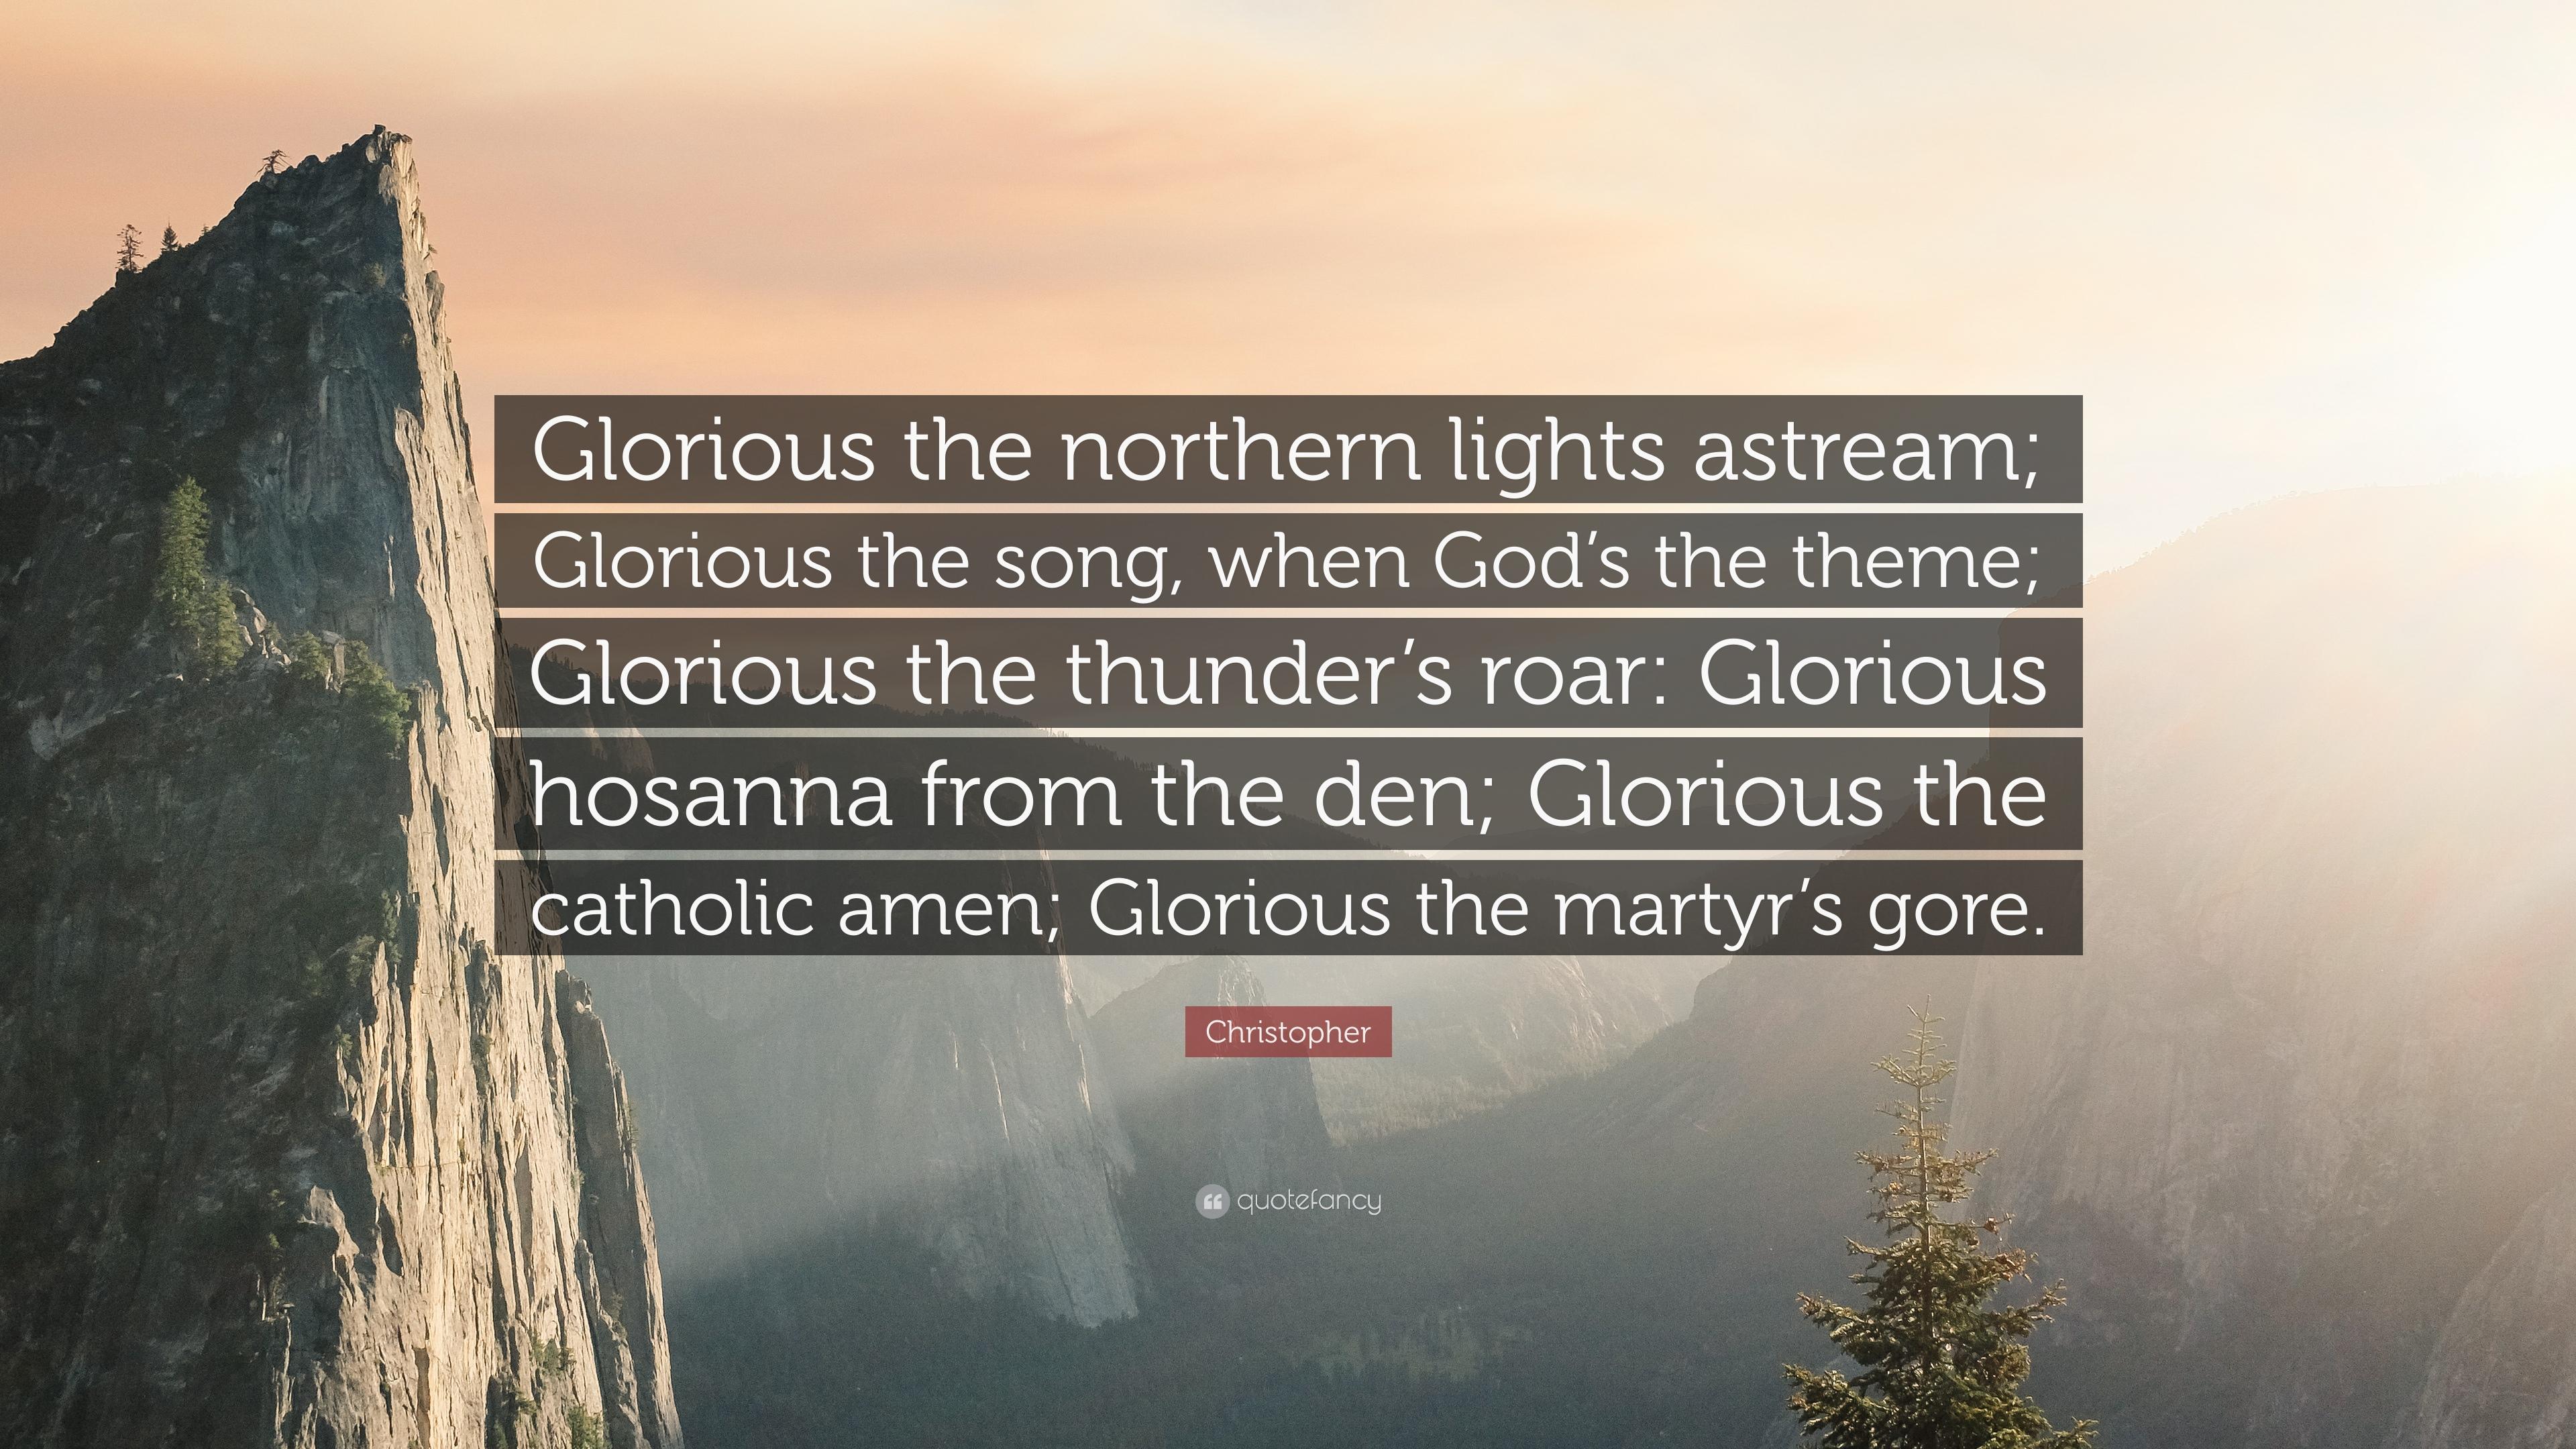 Christopher Quote: “Glorious the northern lights astream